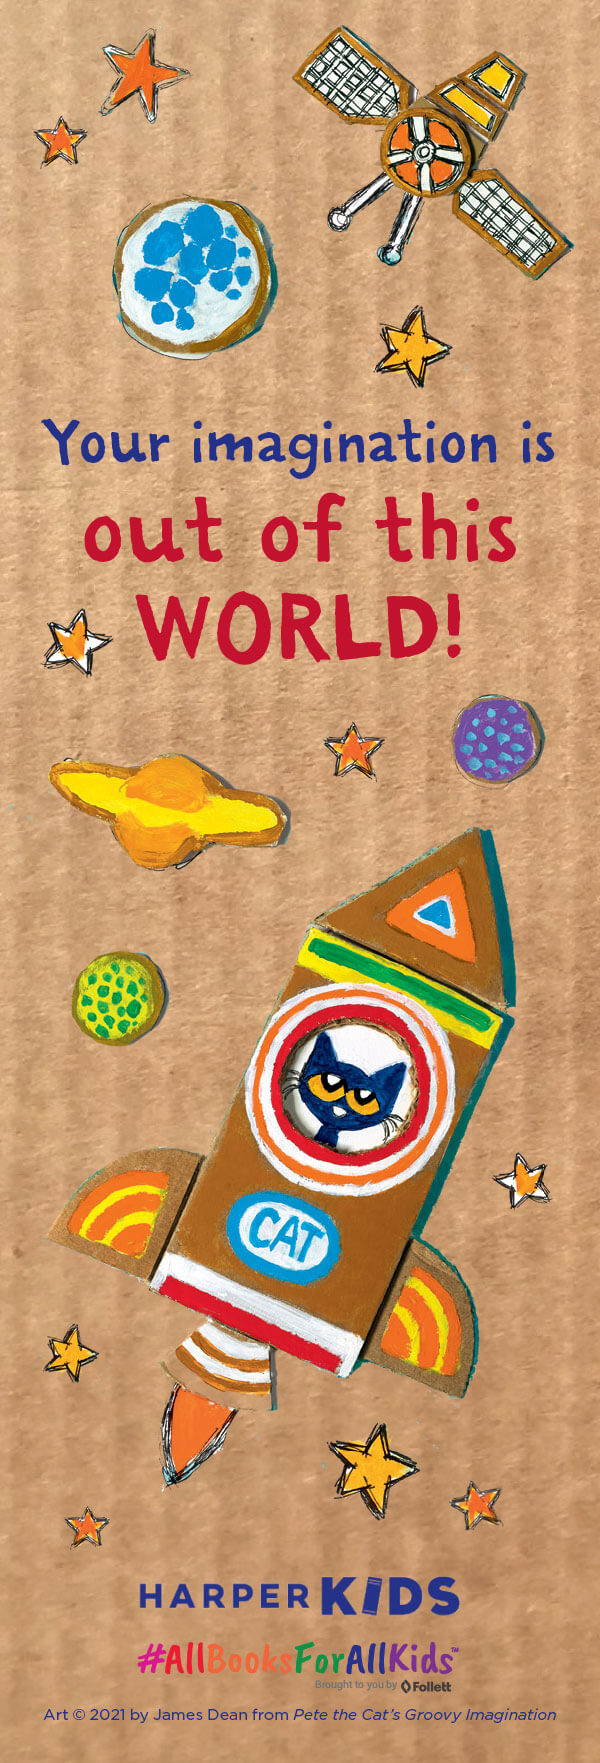 Your imagination is out of this WORLD! Art © 2021 by James Dean from Pete the Cat’s Groovy Imagination Bookmark Image